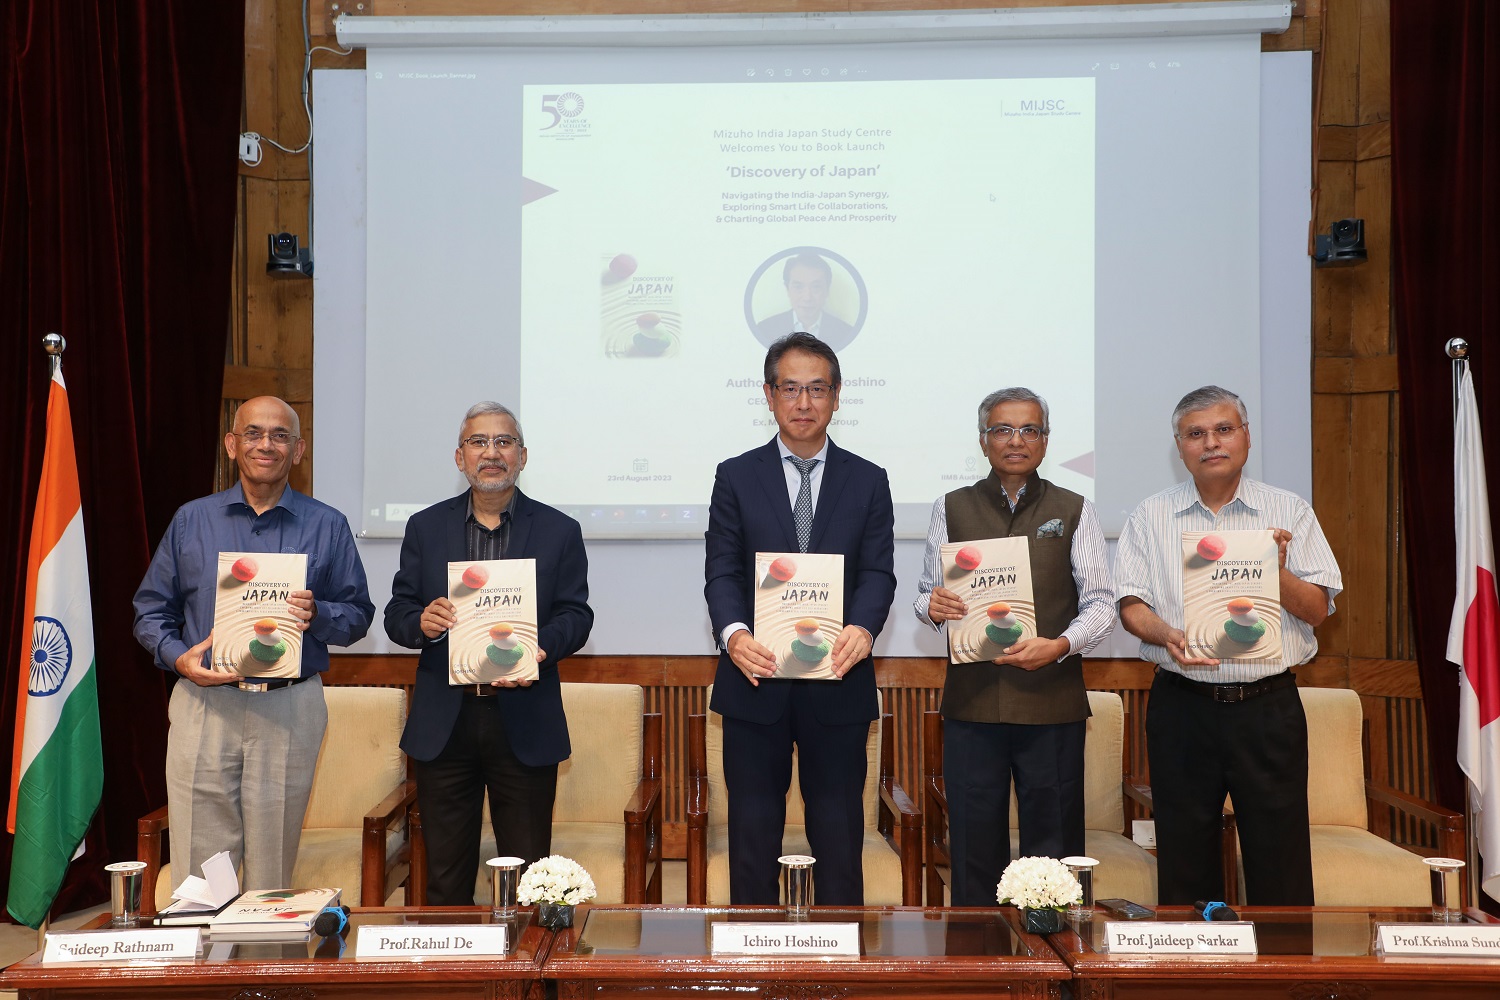 The Mizuho India Japan Study Centre (MIJSC) at IIM Bangalore hosted the launch of the book, ‘Discovery of Japan’, authored by Ichiro Hoshino, on 23rd August 2023.